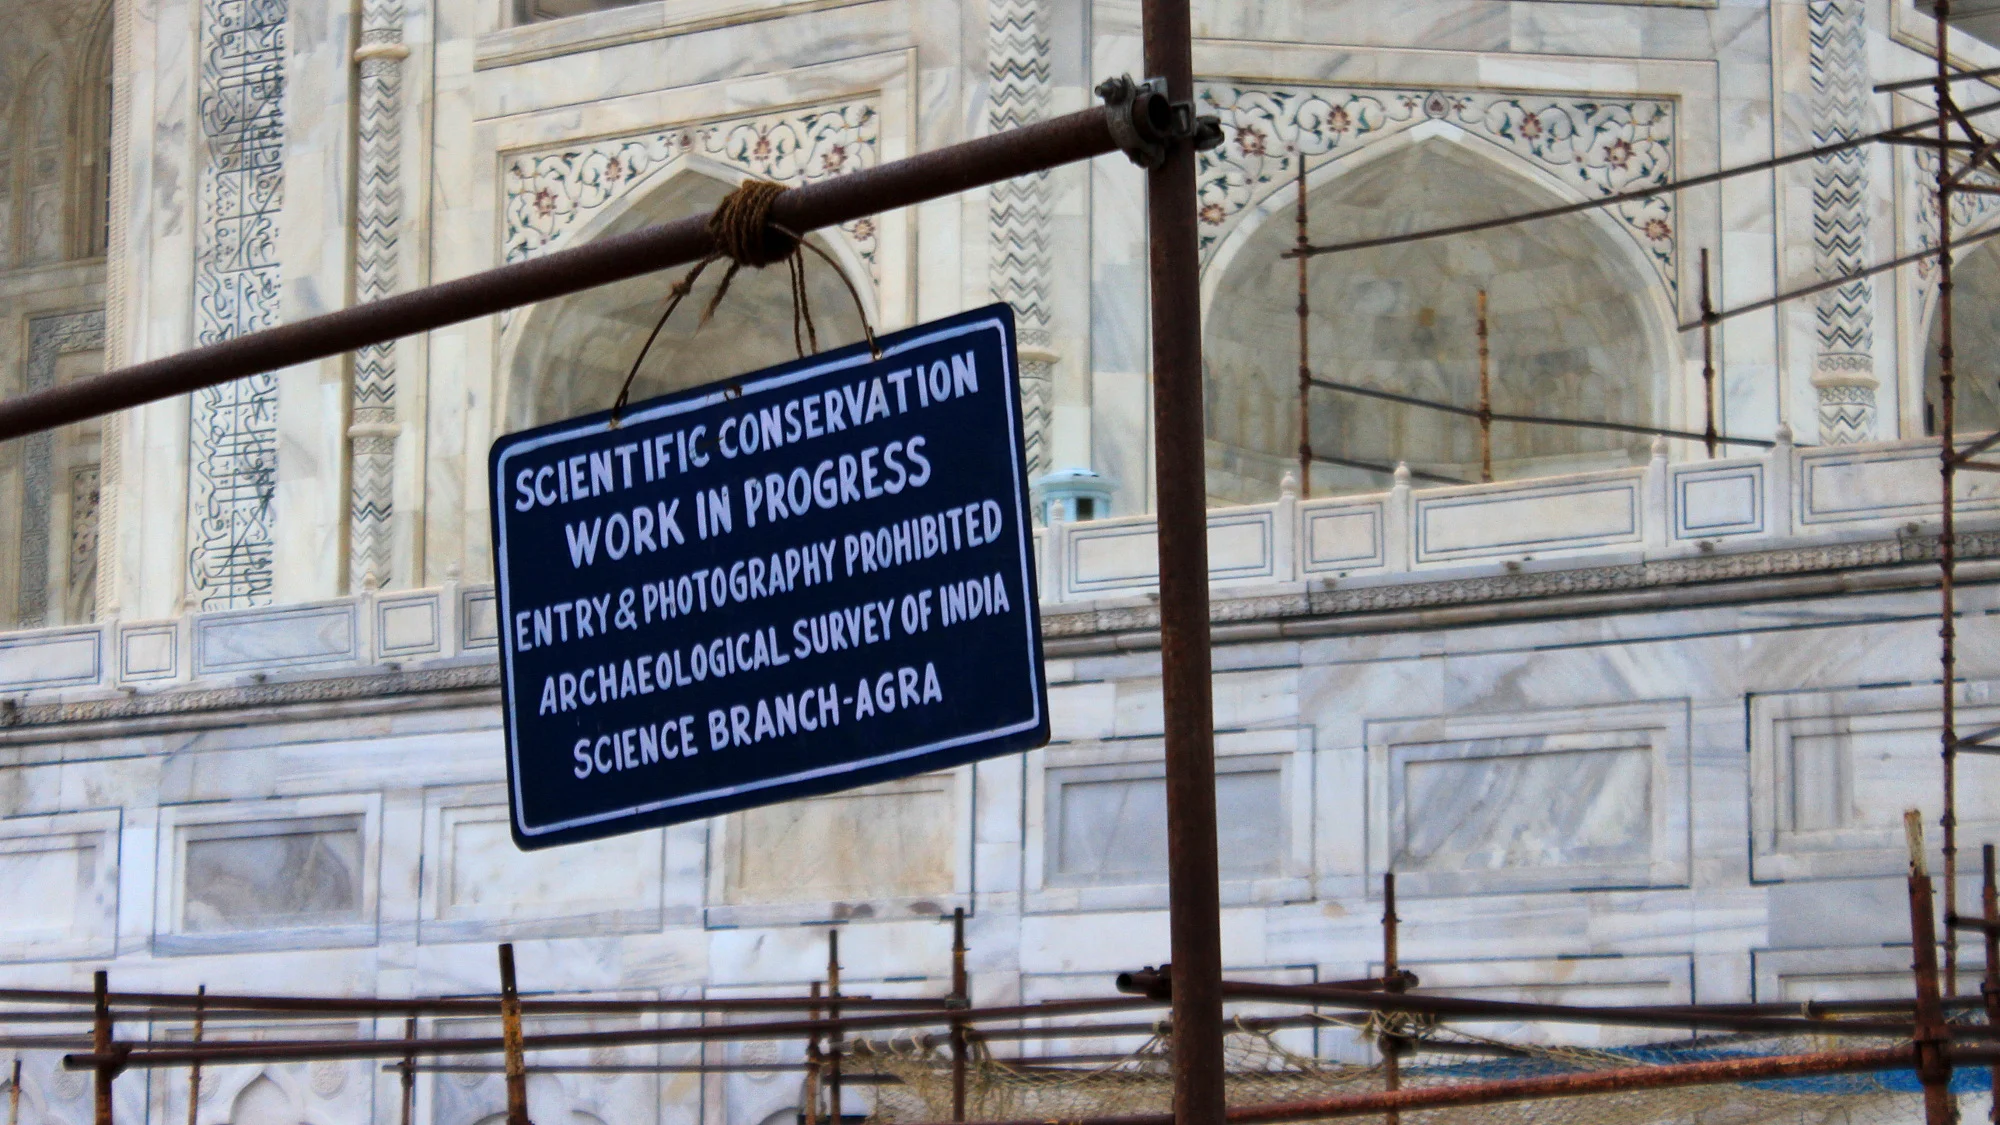 A sign that says "Scientific conservation work in progres - entry & photography prohibited. Archeological Survey of India, Science Branch-Agra" at Taj Mahal under renovation.